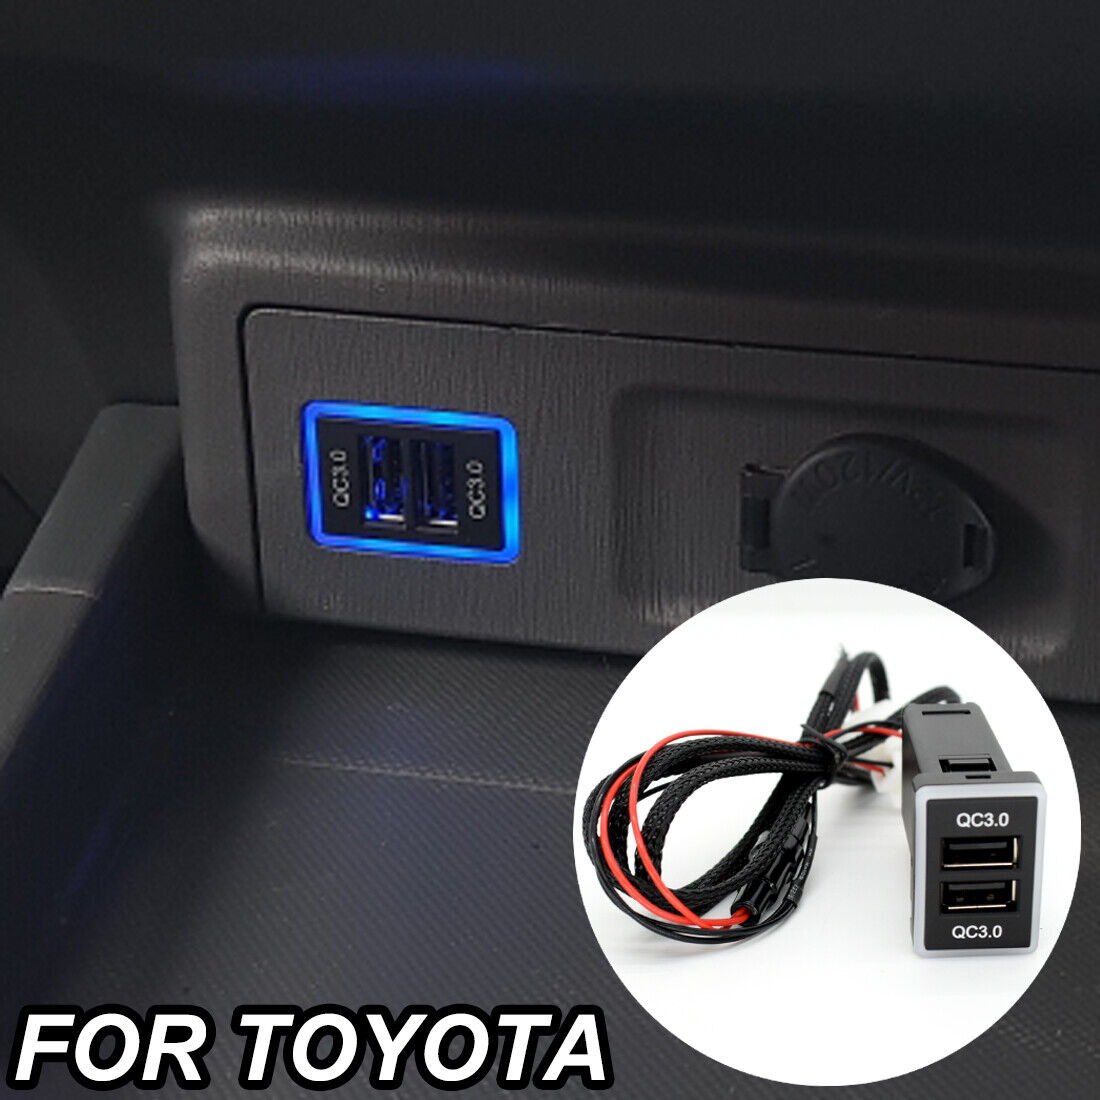 12V Quick Phone USB Car Charger QC3.0 Port For Toyota Blue LED Light Charge Fast